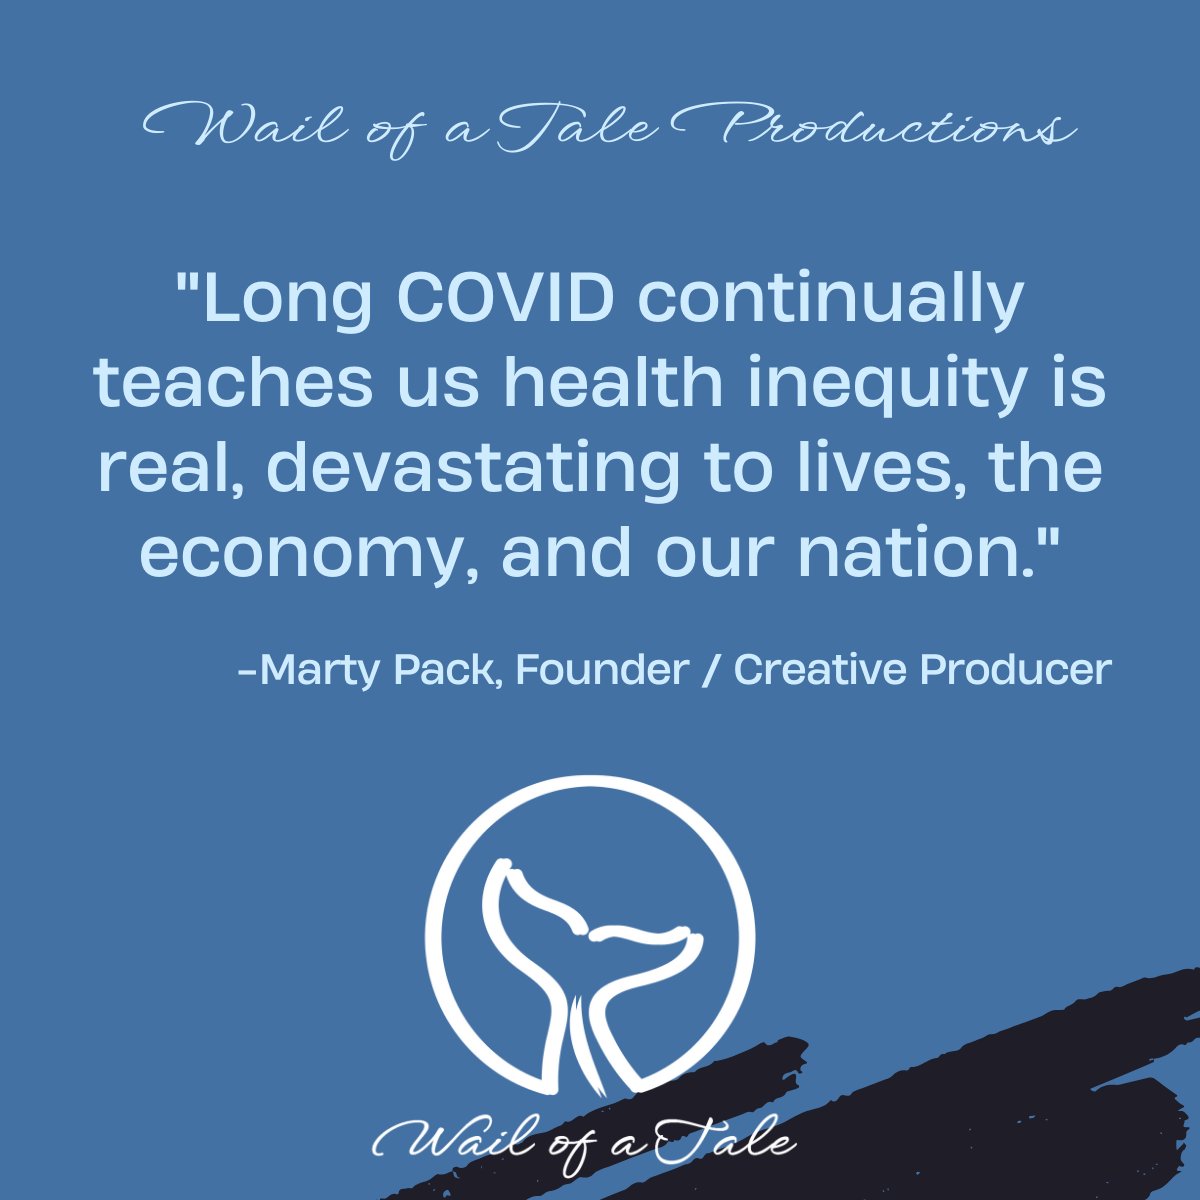 Follow us to understand why. Asking questions, seeking answers. 
#nonprofit #documentary #health #equity #healthequity  #marginalization #socialjustice #hearus #donate #volunteer #followus